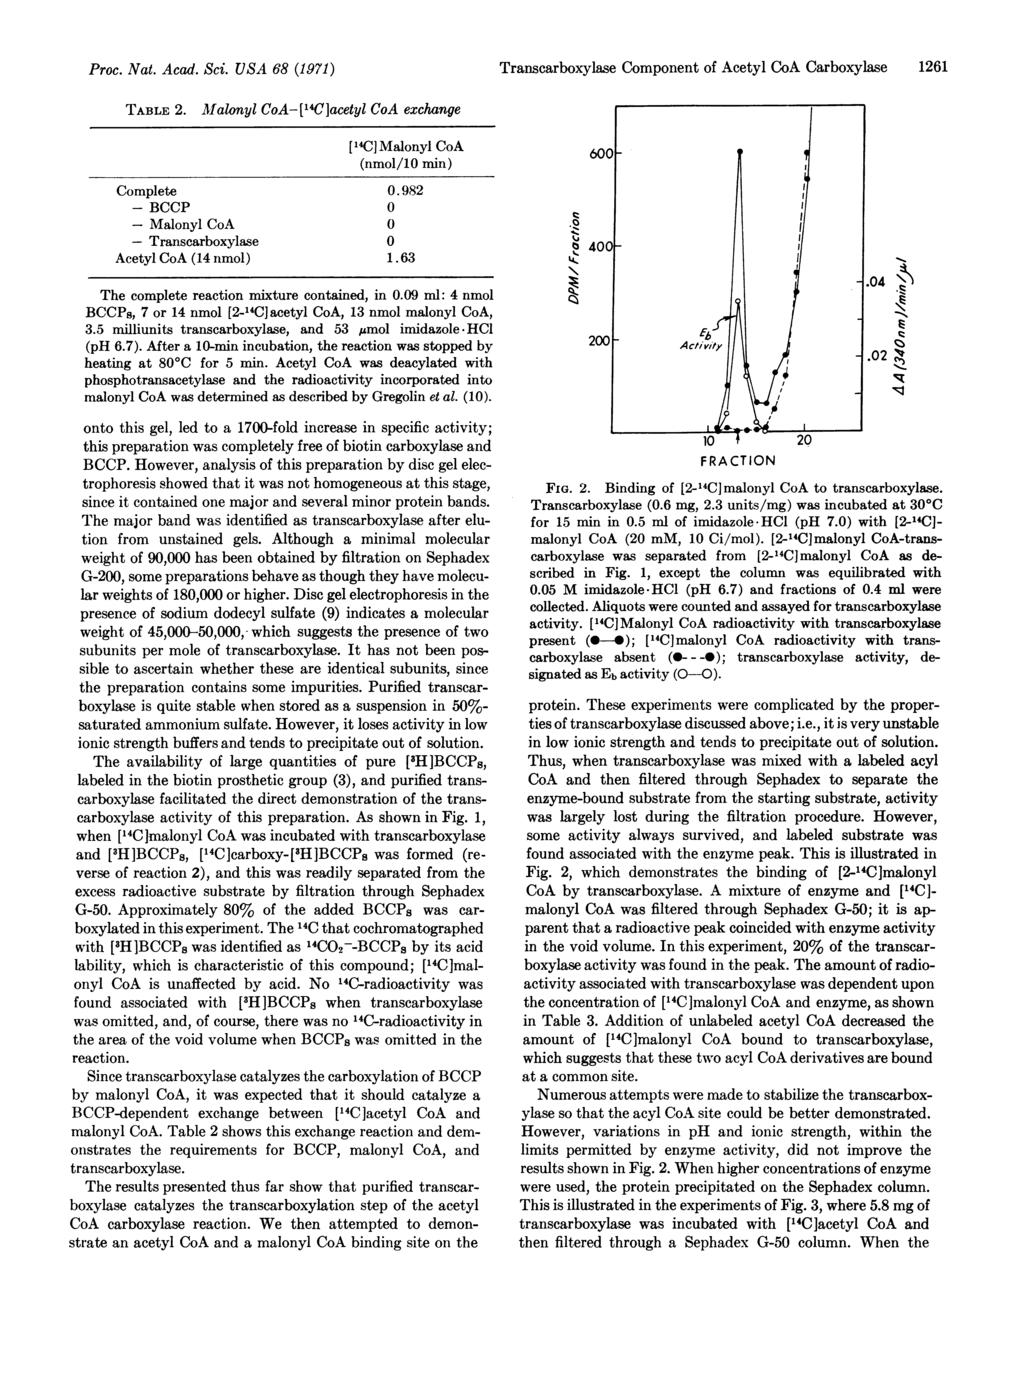 Proc. Nat. Acad. Sci. VSA 68 (1971) Transcarboxylase Component of Acetyl CoA Carboxylase 1261 TABLE 2. Malonyl CoA[W4C]acetyl CoA exchange [14C]Malonyl CoA (nmol/10 min) Complete 0.